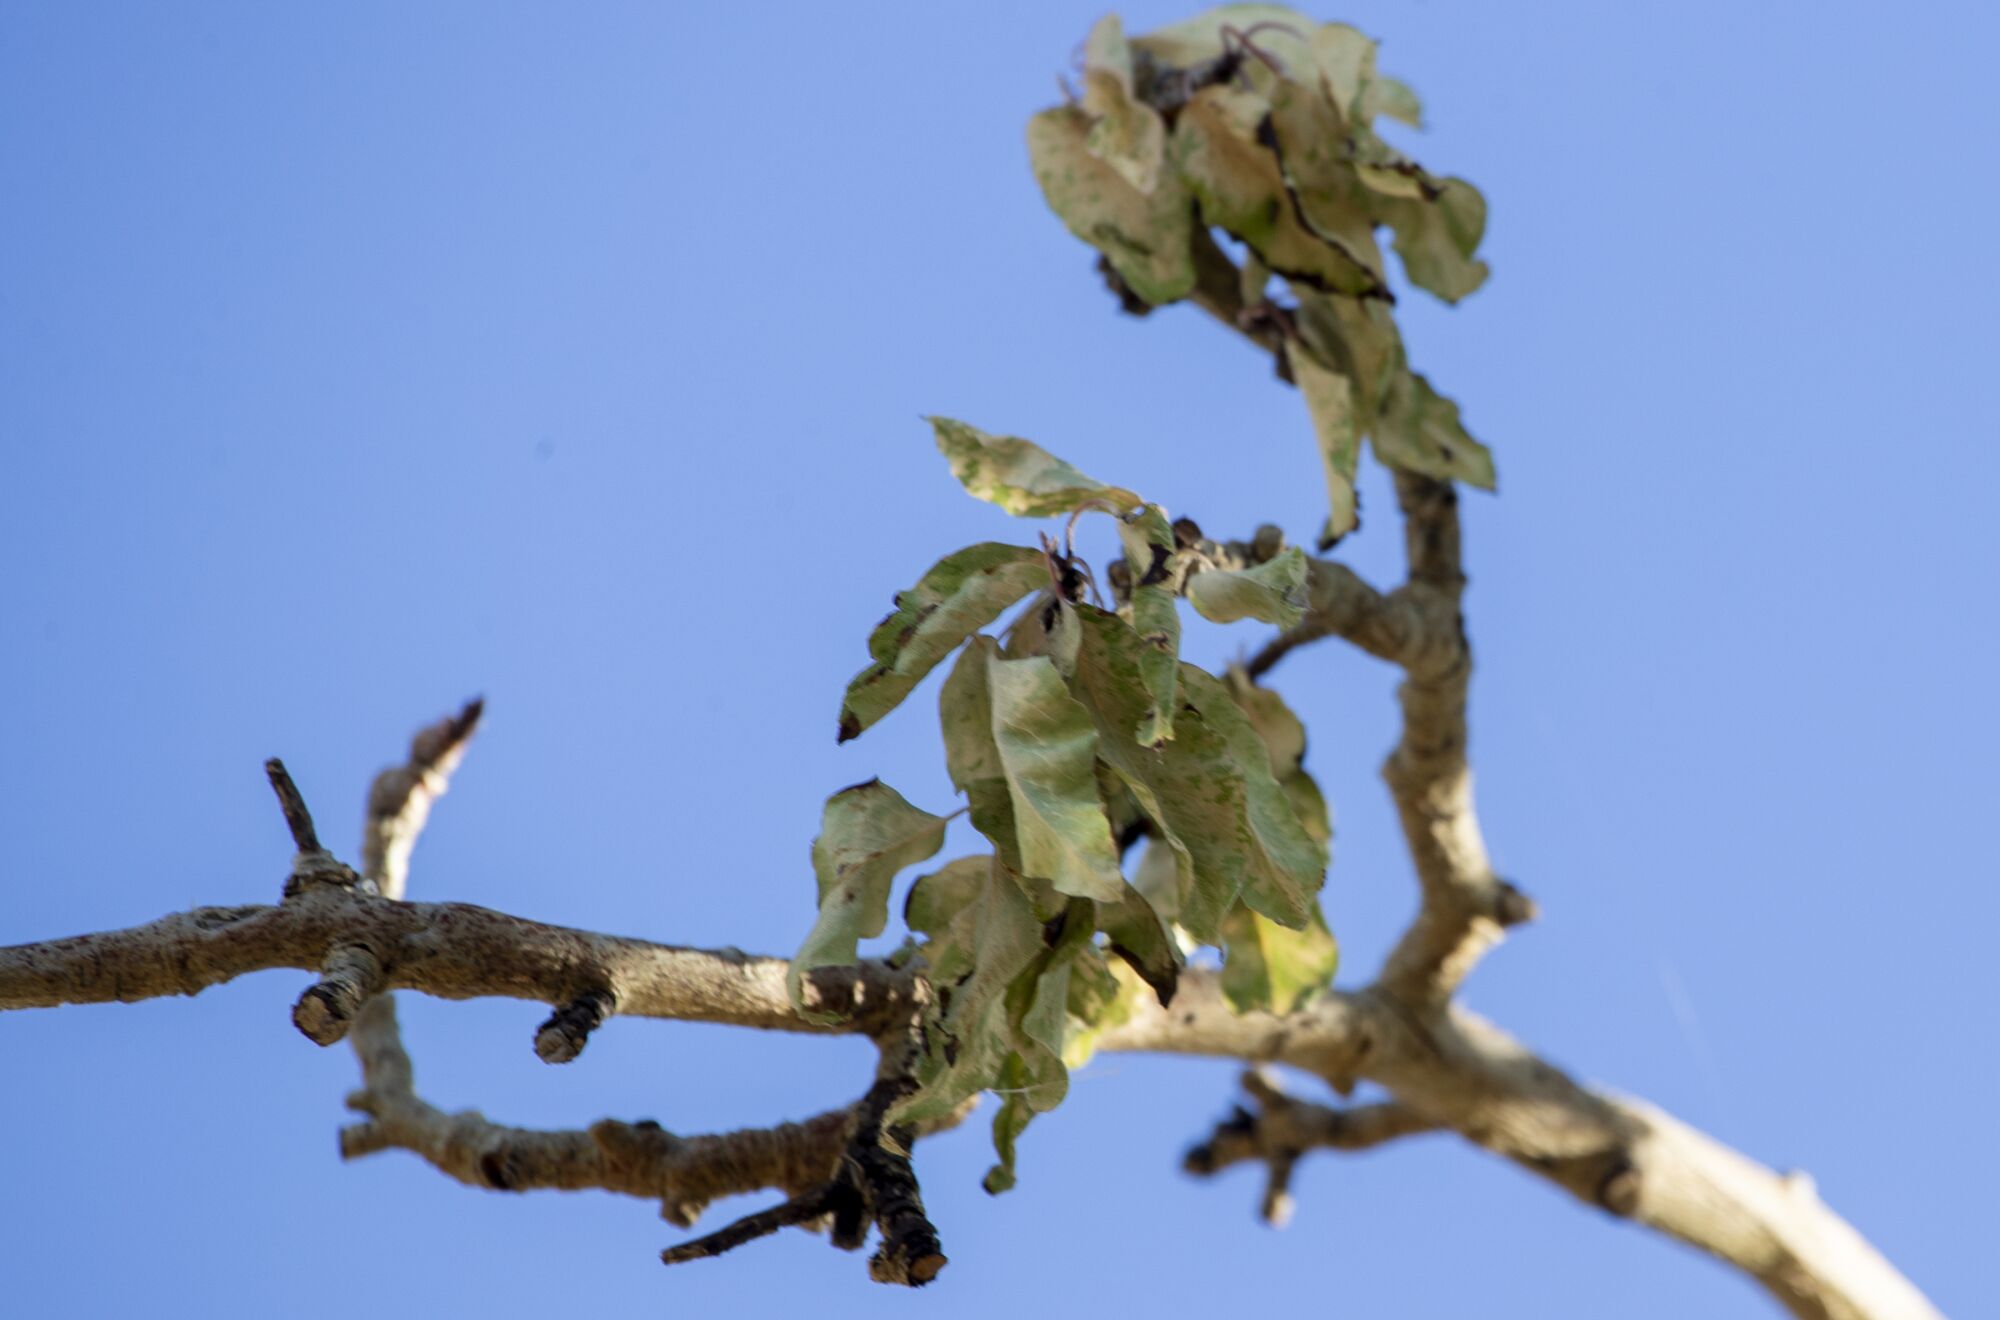 Fire blight, oozing cankers and blackened leaves on the branches of a pear tree, at the Manzanar National Historic Site.